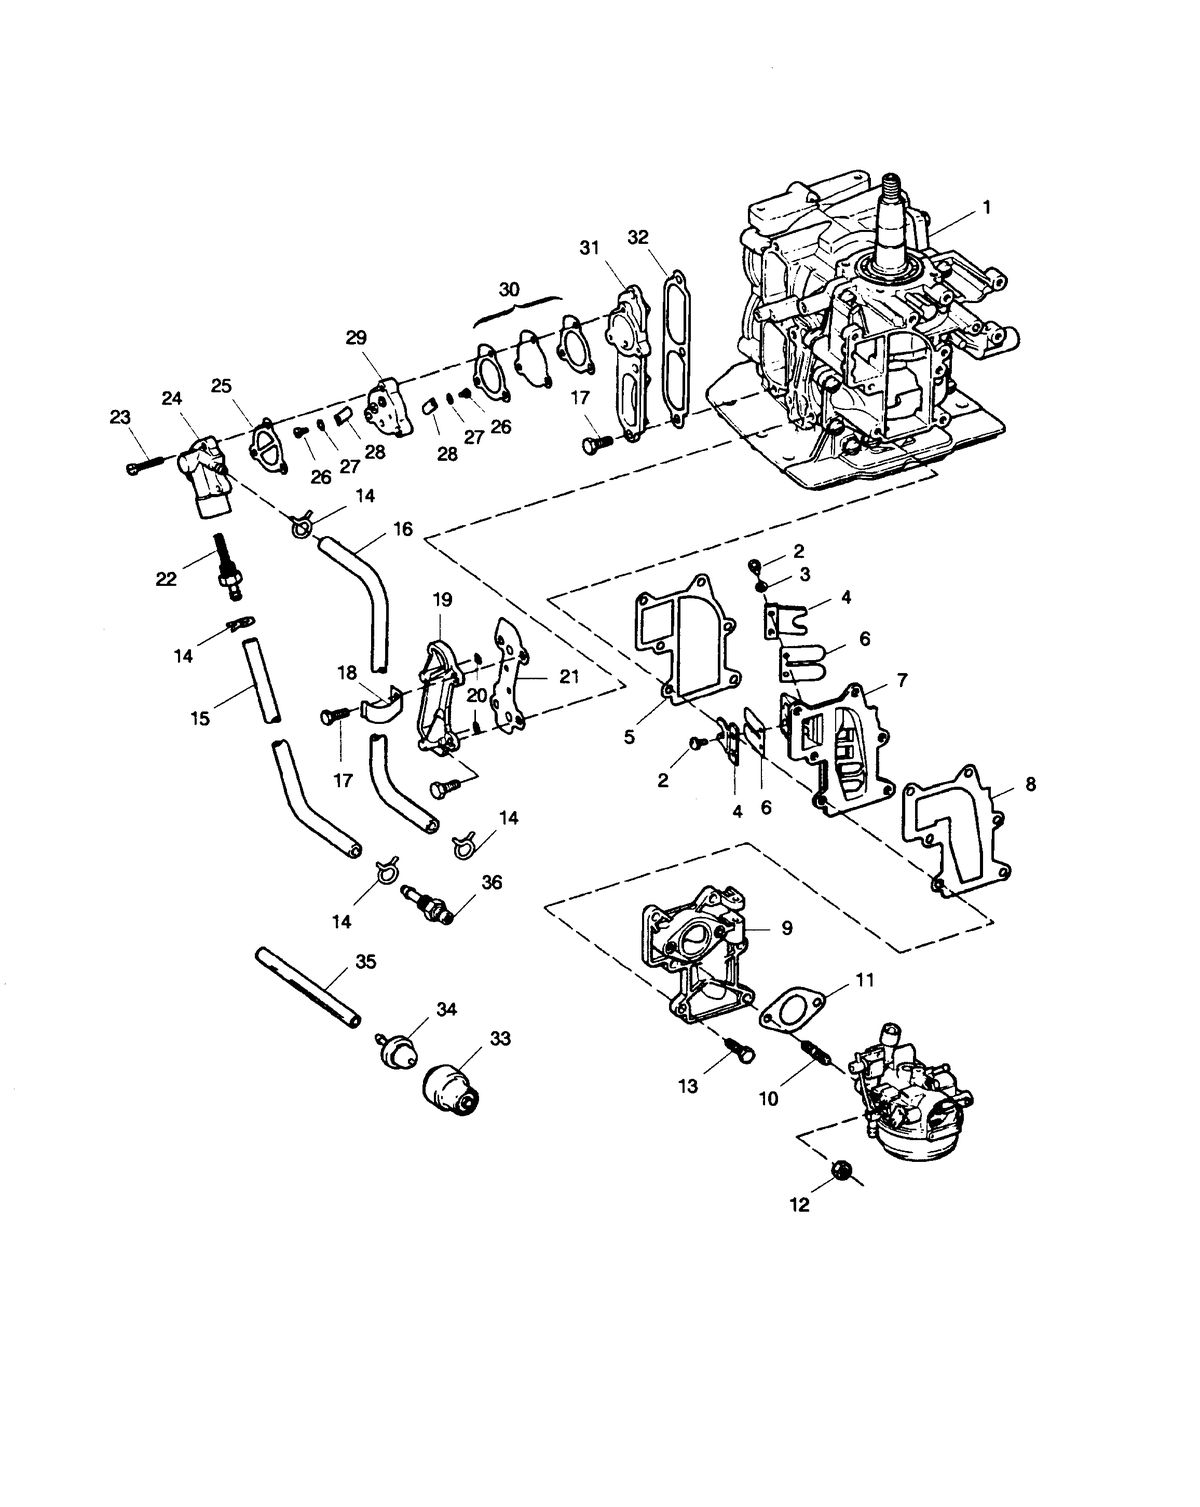 SEARS SEARS 9.9 H.P. FUEL INTAKE AND RECIRCULATION SYSTEM